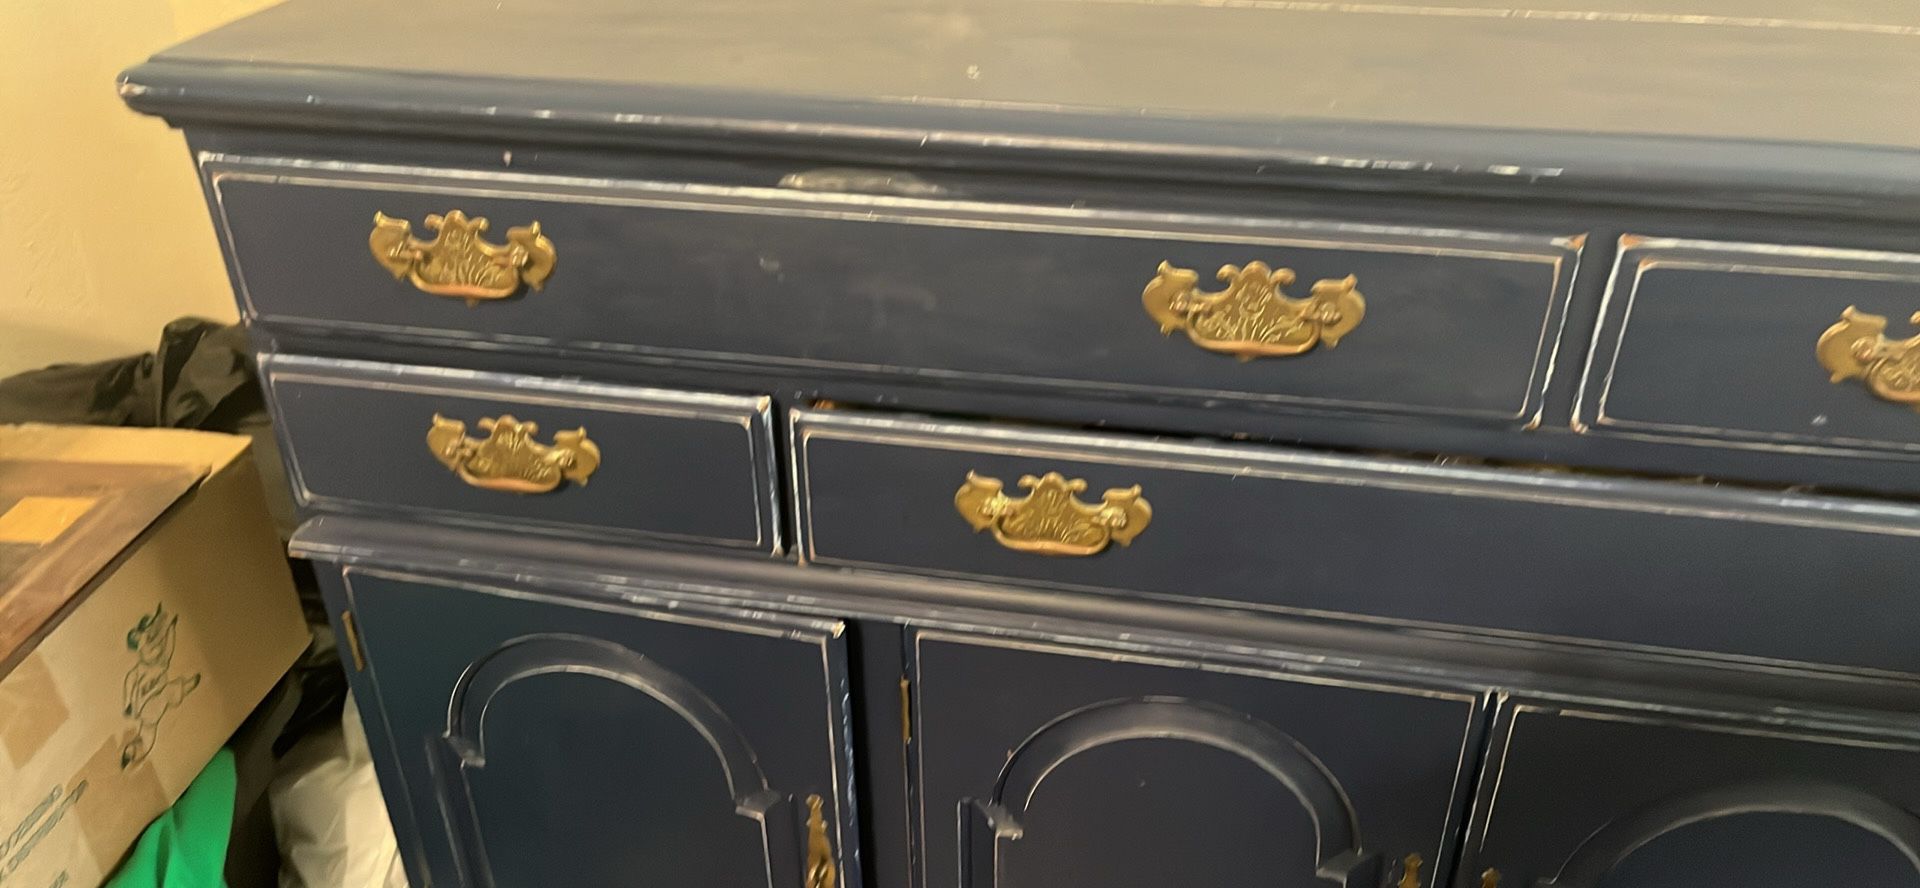 Very Nice Well-Maintained Dresser